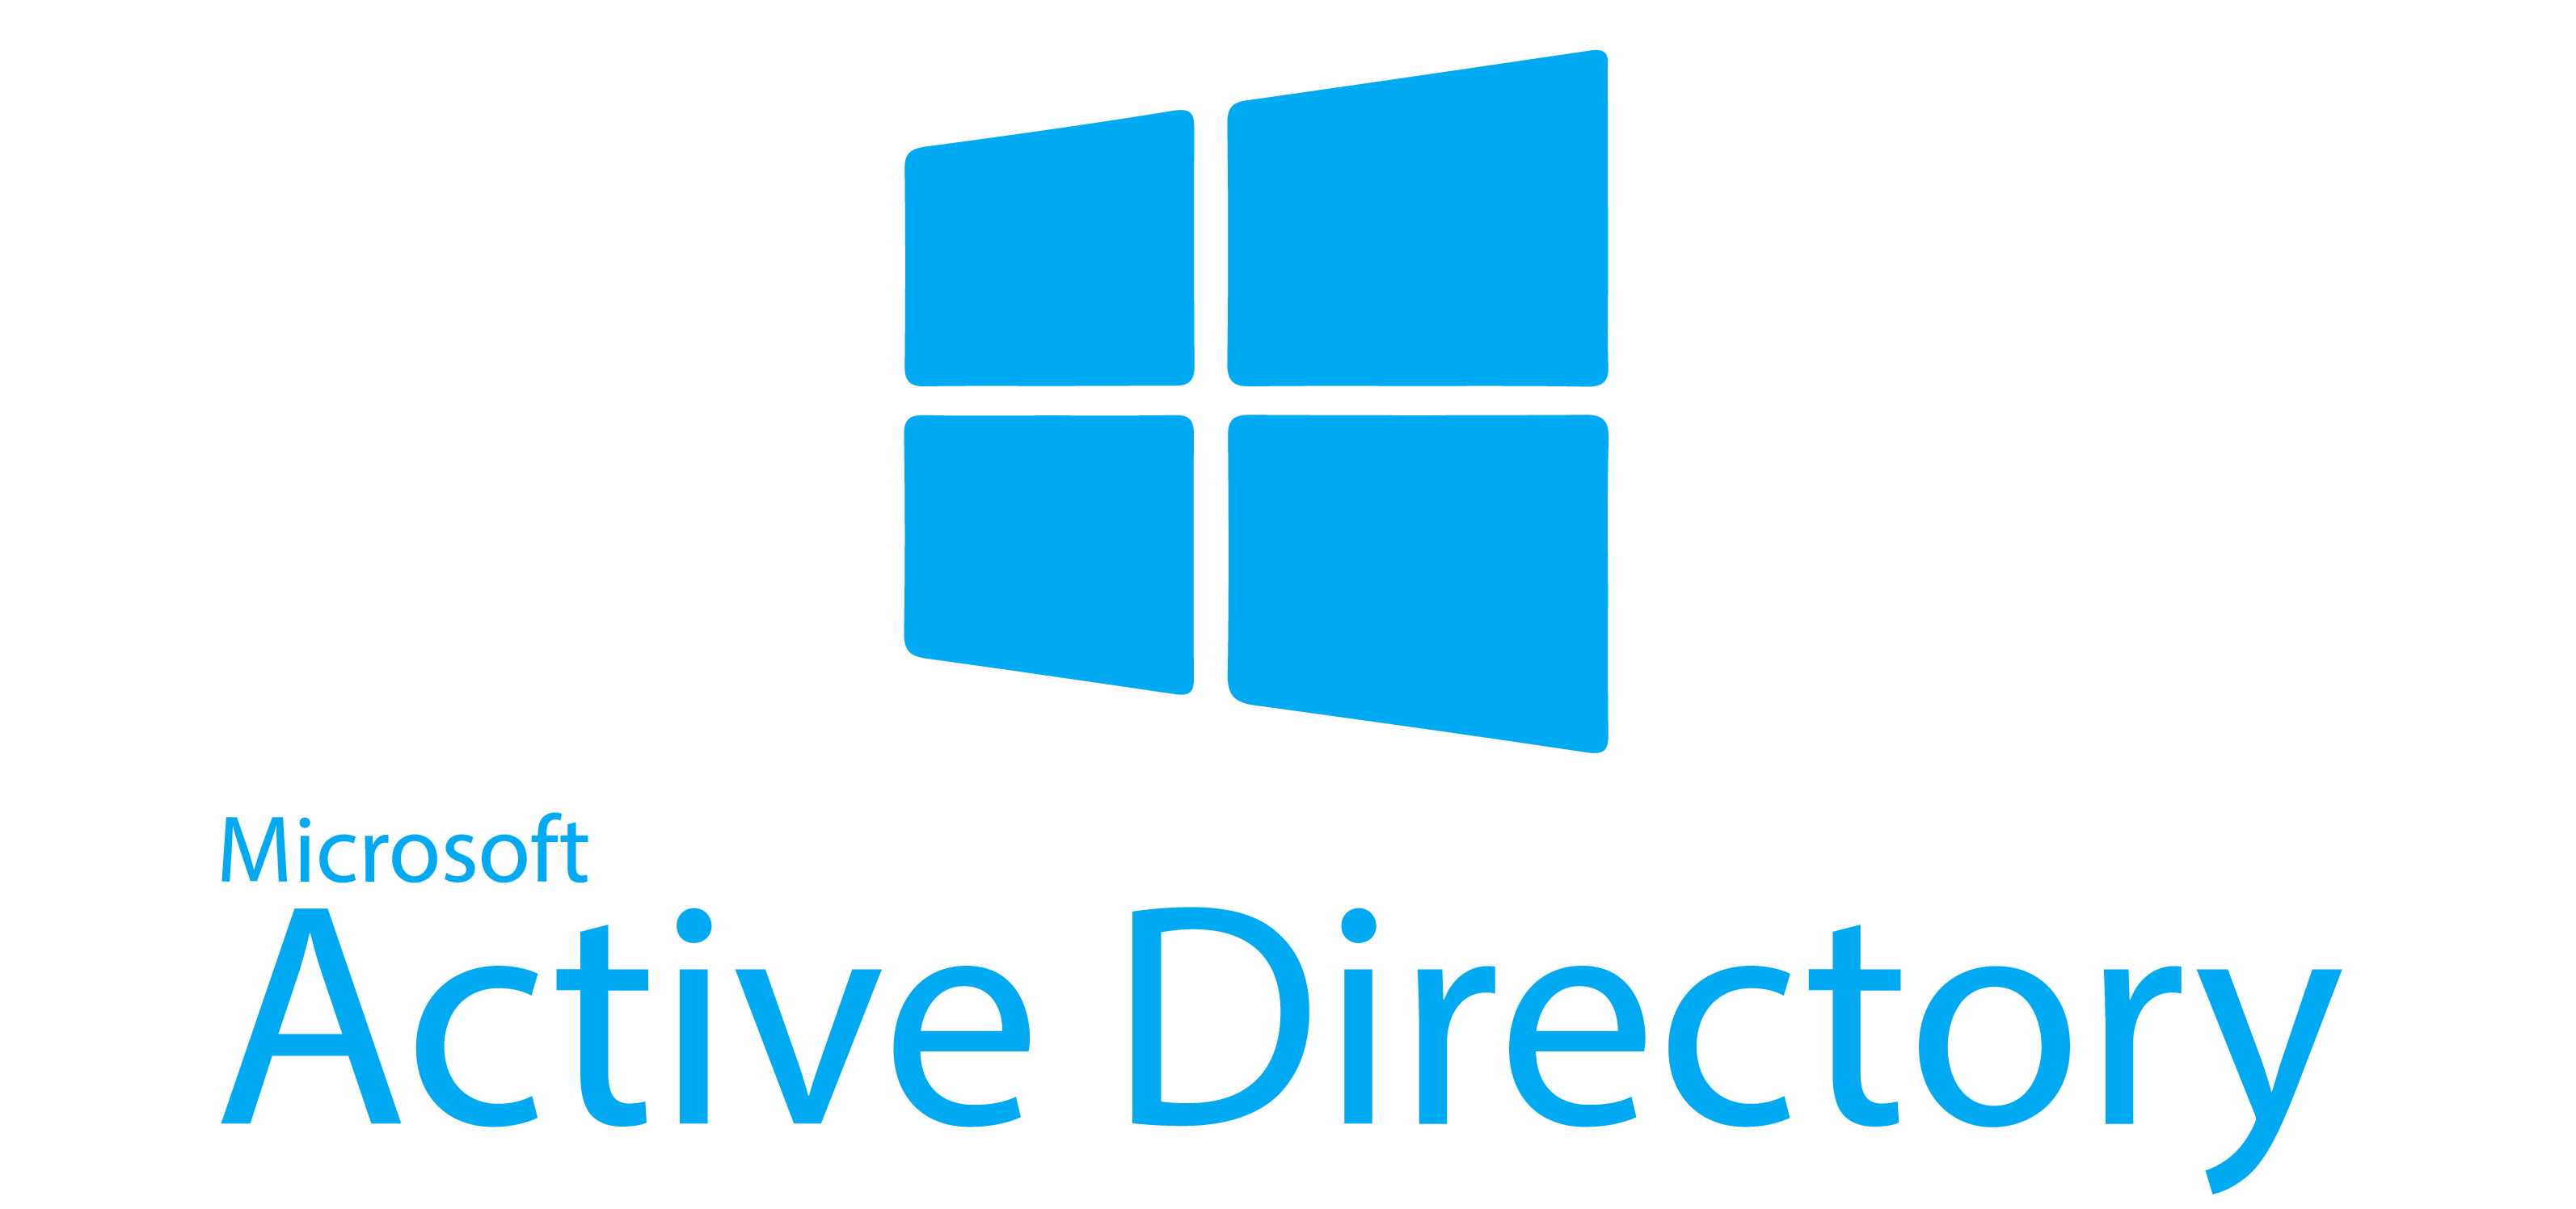 Active Directory services